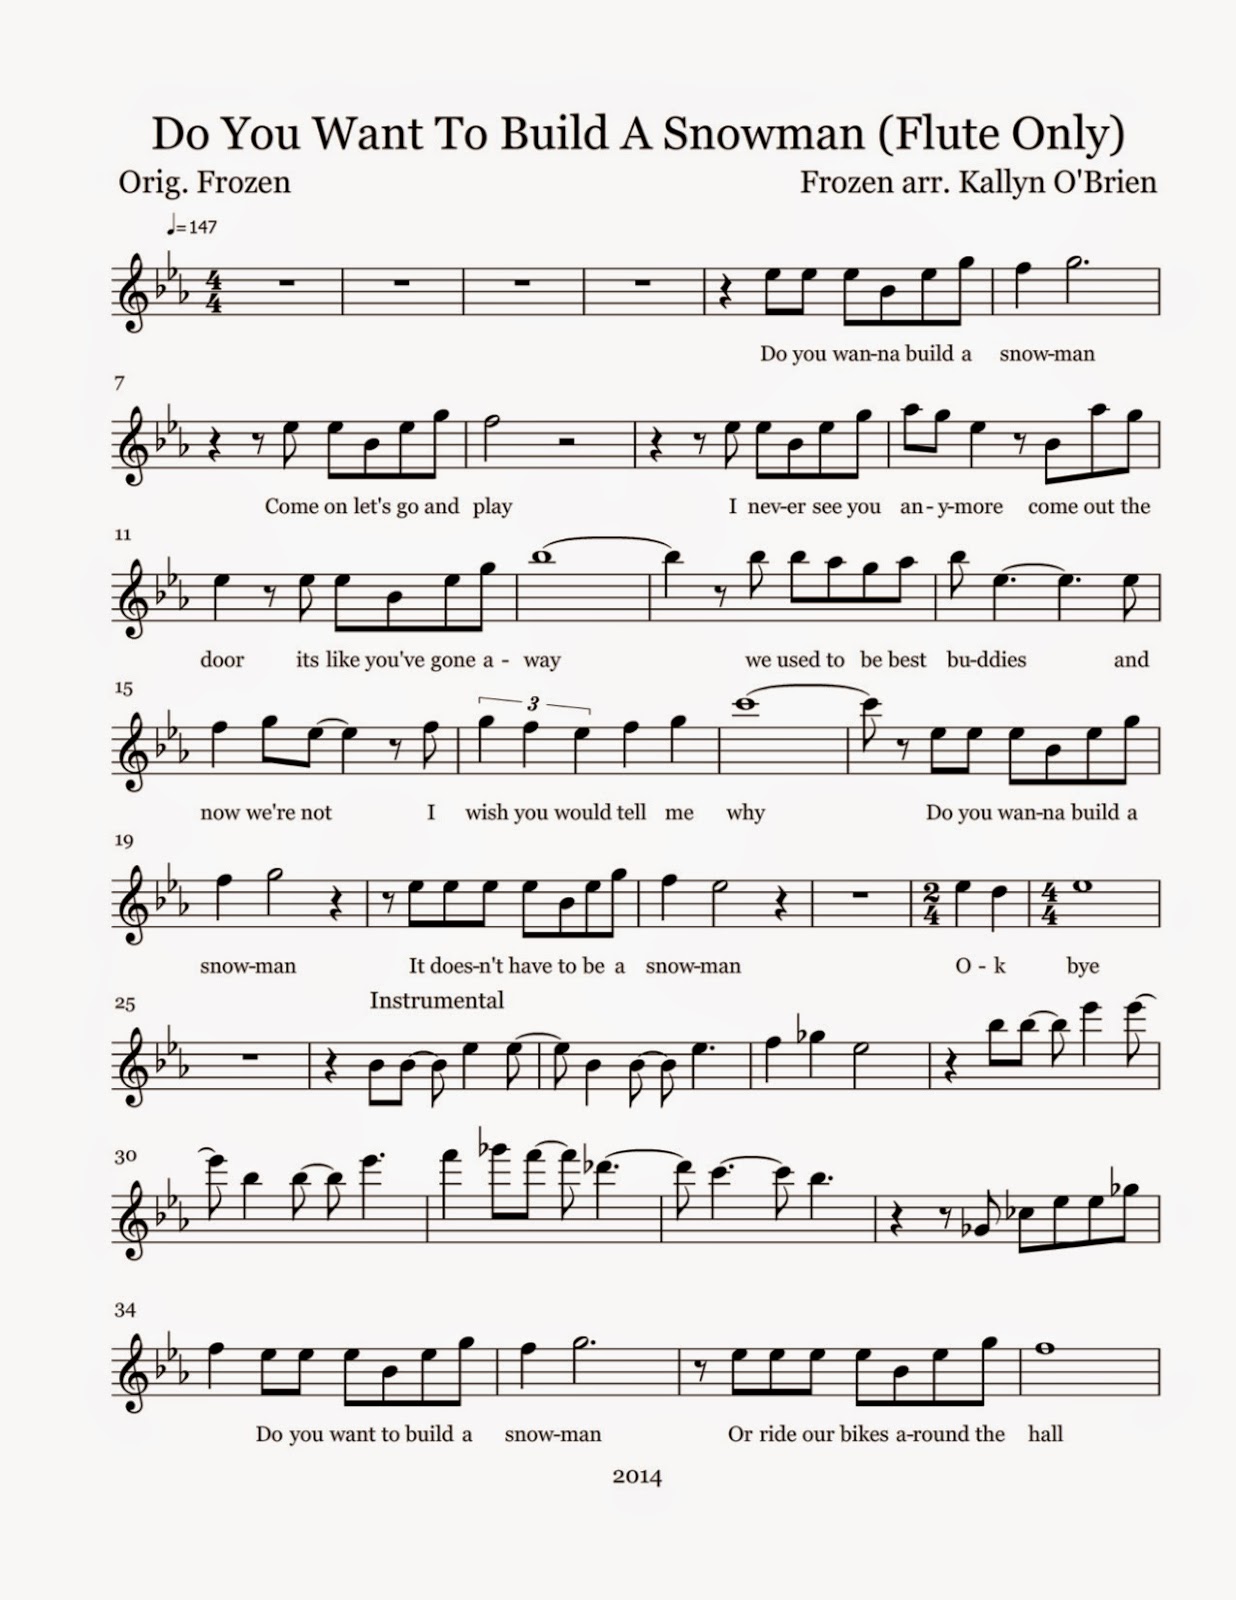 Do You Want to Build a Snowman? - from Frozen (Sheet Music) Disney